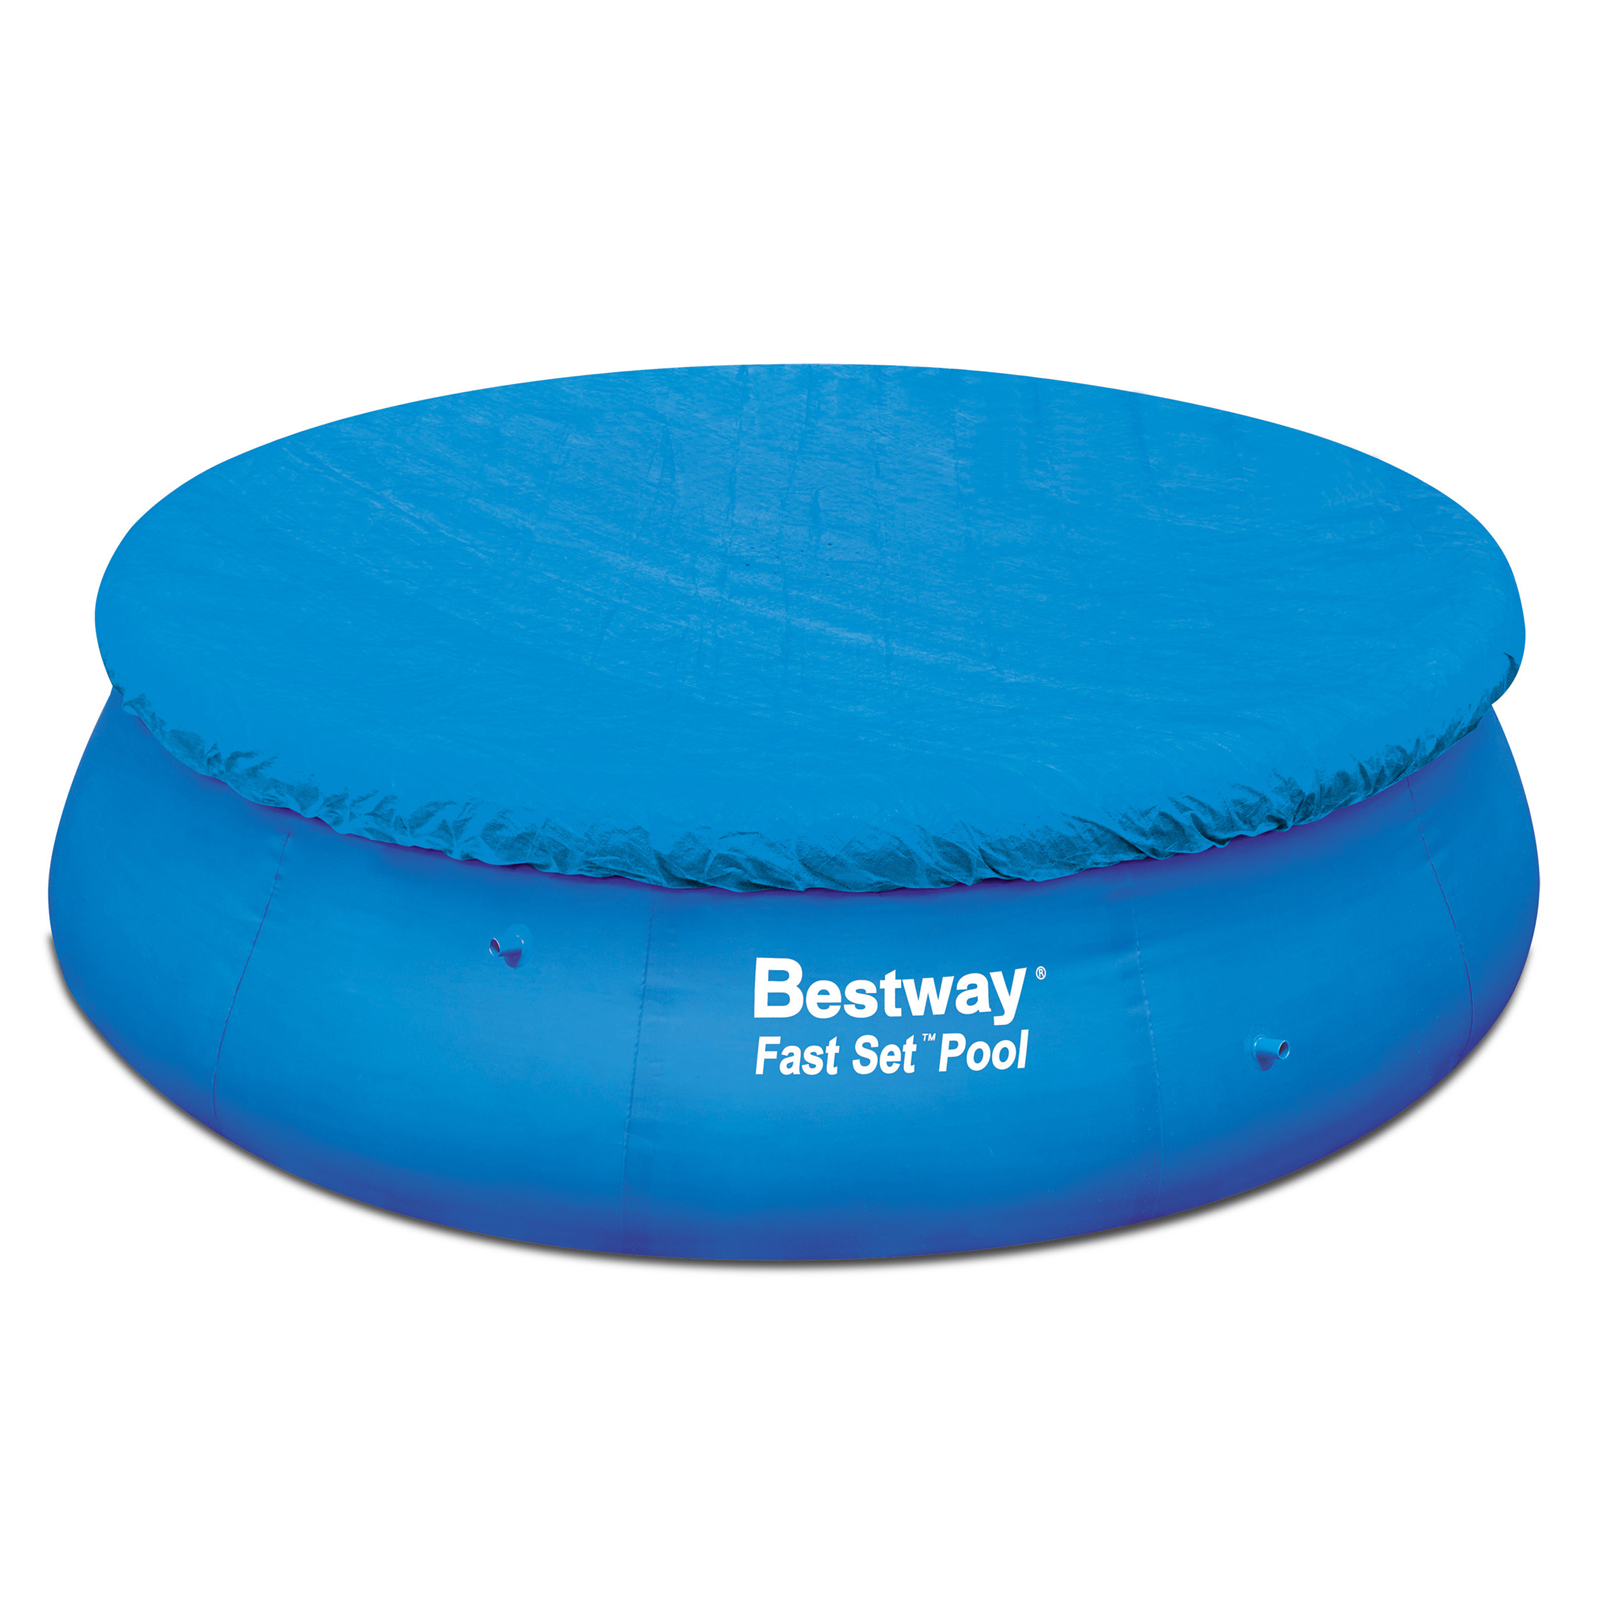 UPC 821808580347 product image for Bestway Fast Set 12-foot Pool Cover | upcitemdb.com